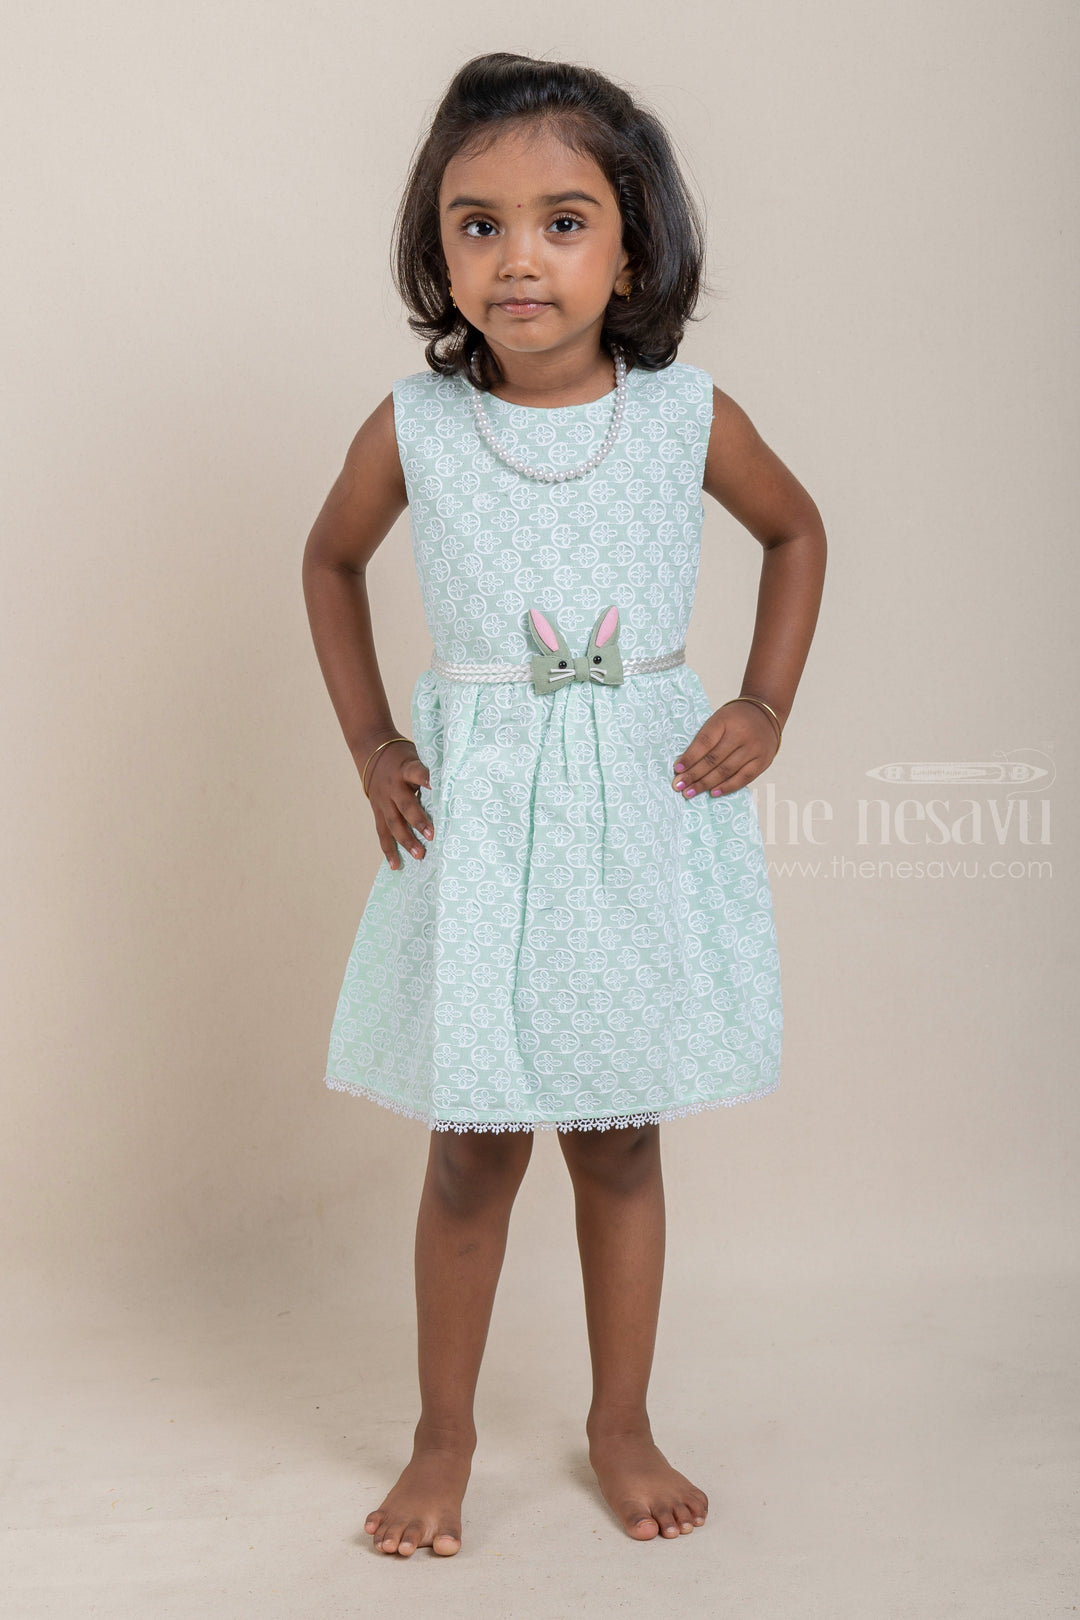 The Nesavu Baby Cotton Frocks Gorgeous All Over Floral Embroidered Green Bamboo Cotton Frock For Baby Girls Nesavu 14 (6M) / Green / Cotton BFJ424C Floral Designer baby Wear Frock | Cotton Dresses For Kids | The Nesavu